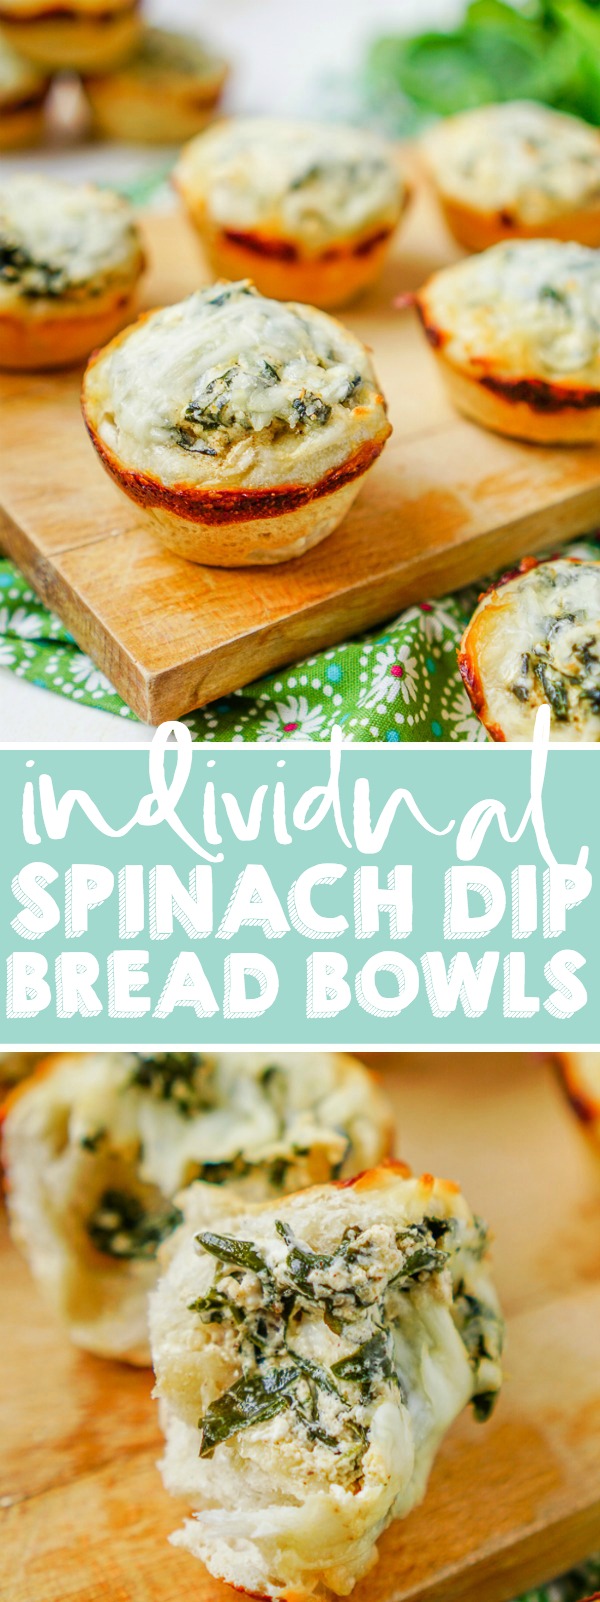 It doesn't get much better than deliciously cheesy spinach dip stuffed inside warm french bread! These Individual Spinach Dip Bread Bowls make great party food and holiday appetizers! | THE LOVE NERDS #thanksgivingappetizer #christmasappetizer #superbowlfood